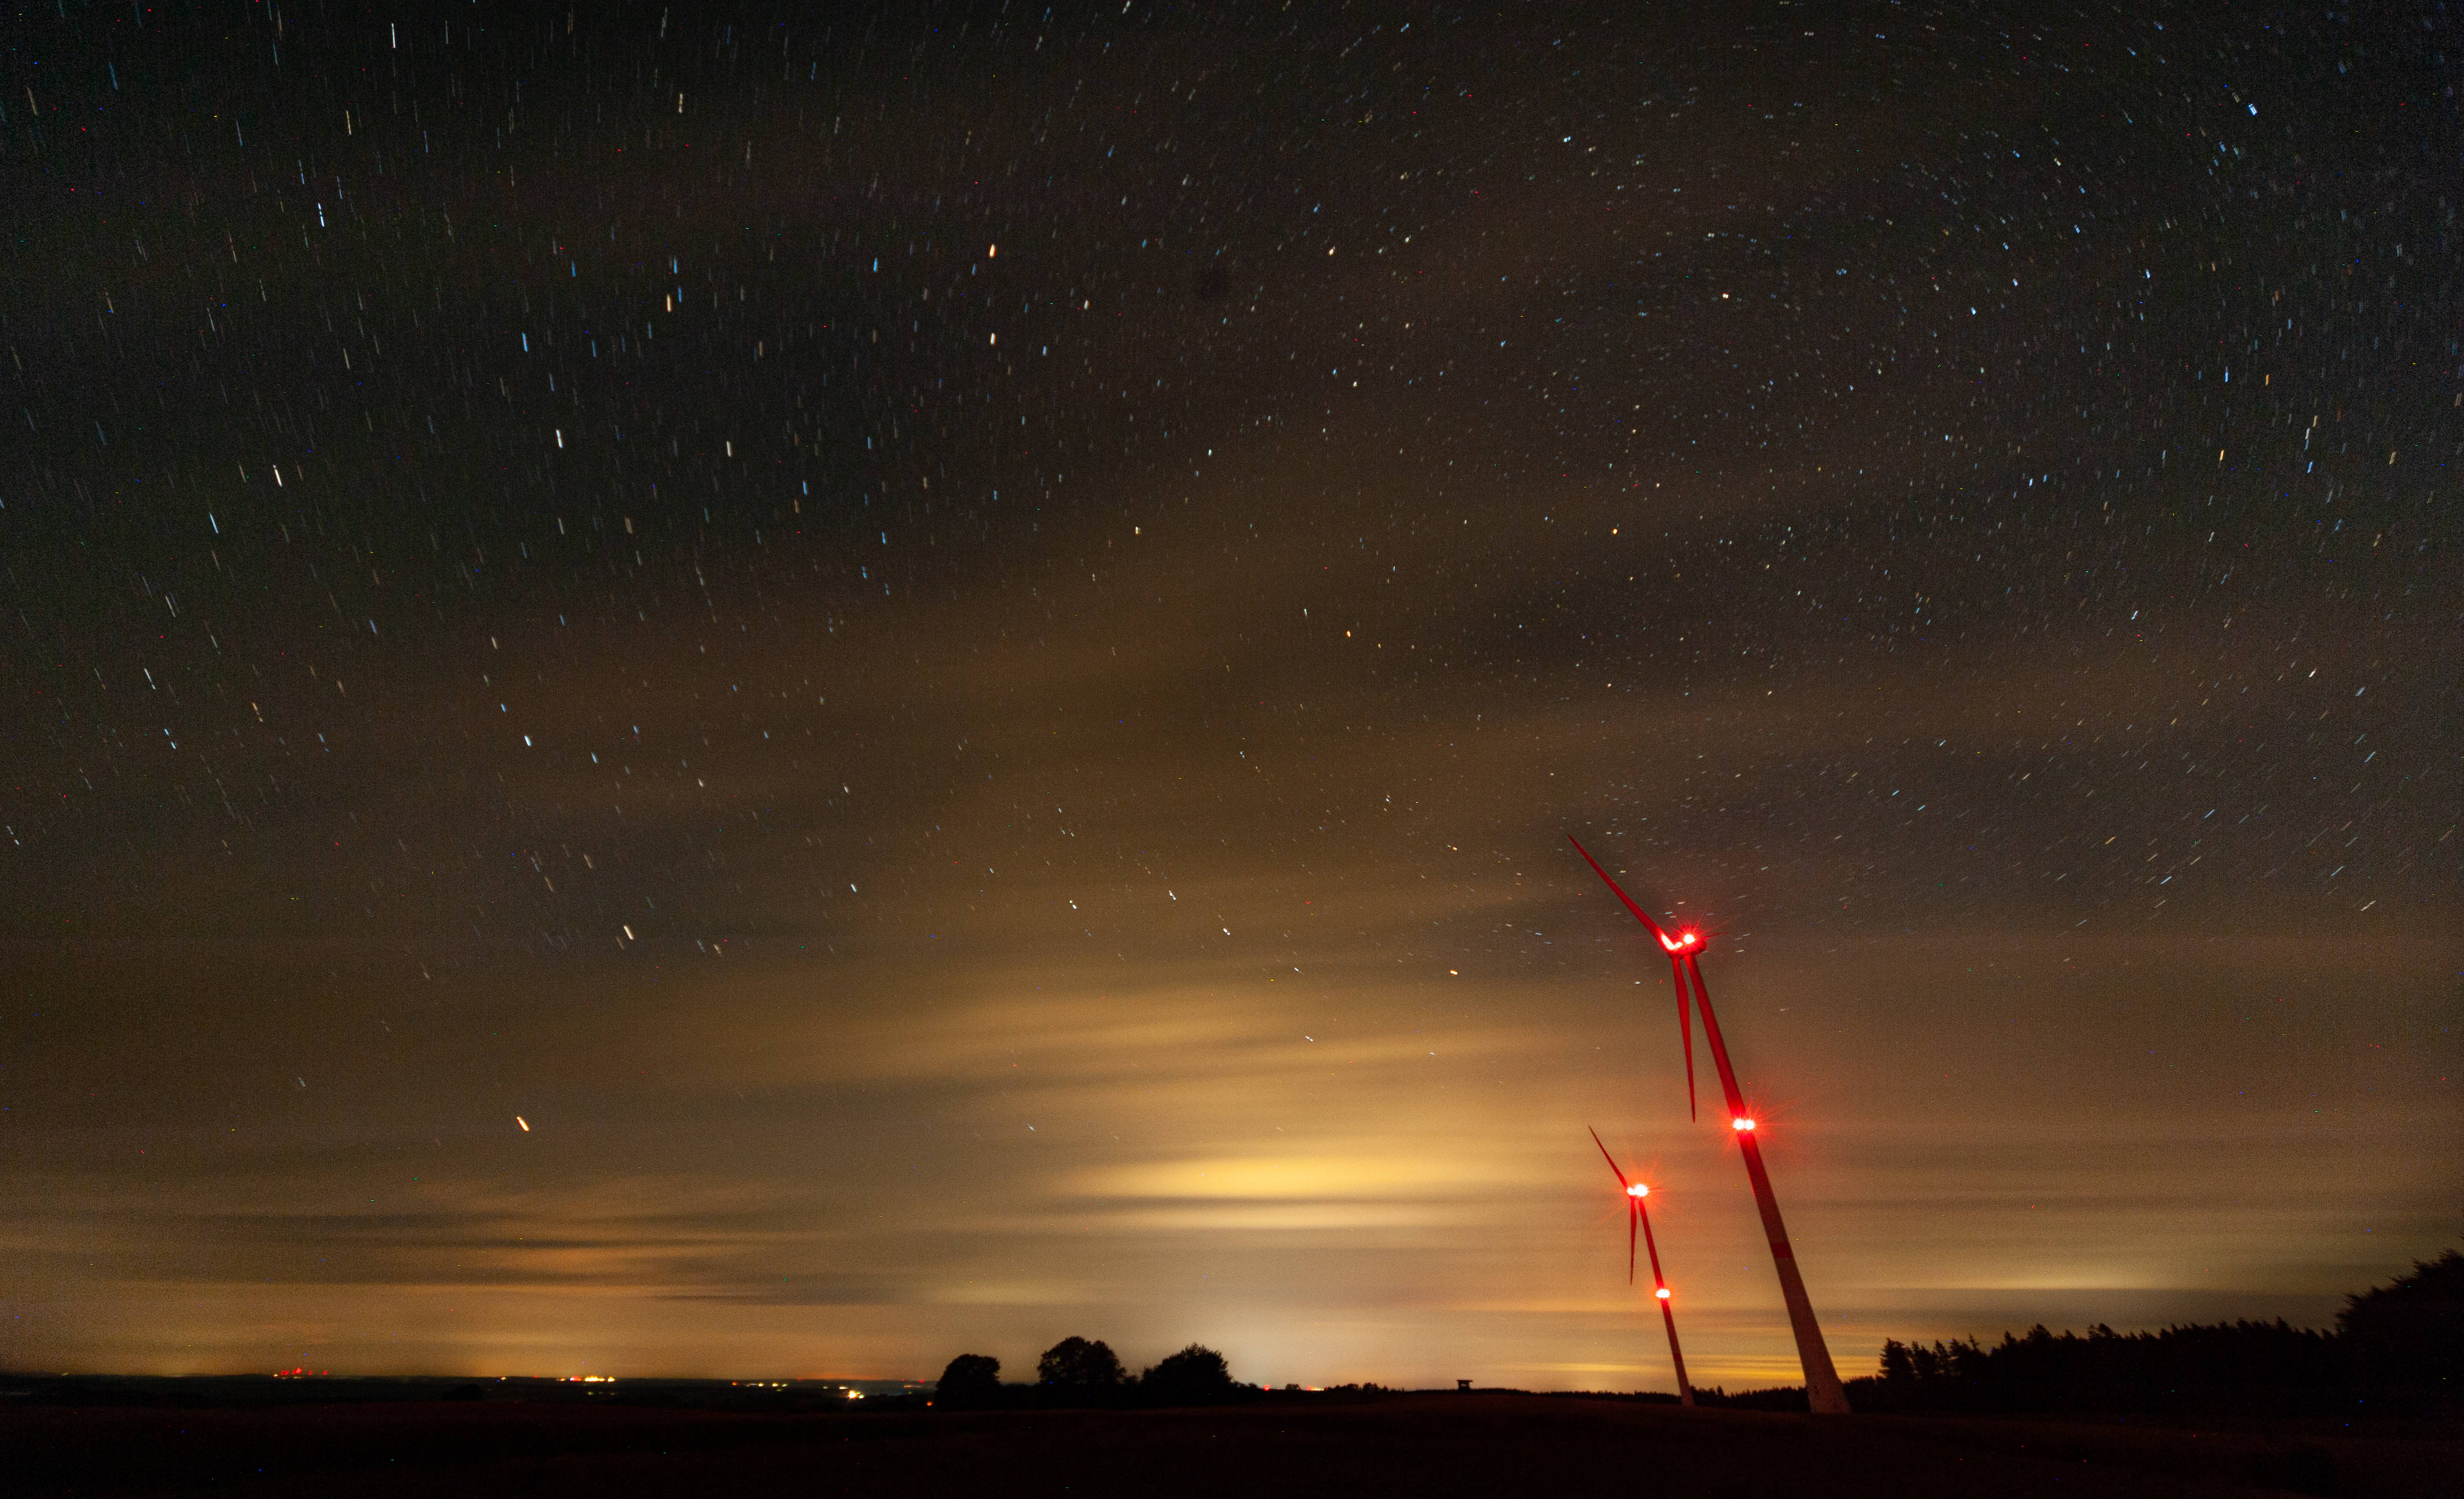 Two motionless wind turbines in a cloudy night. They are reddened by their anti-collision lights in the middle and on the to p. In the background, there are clouds lit up in yellow-orangy colors by the village below. Above the clouds, a sky full of stars is recognizable.